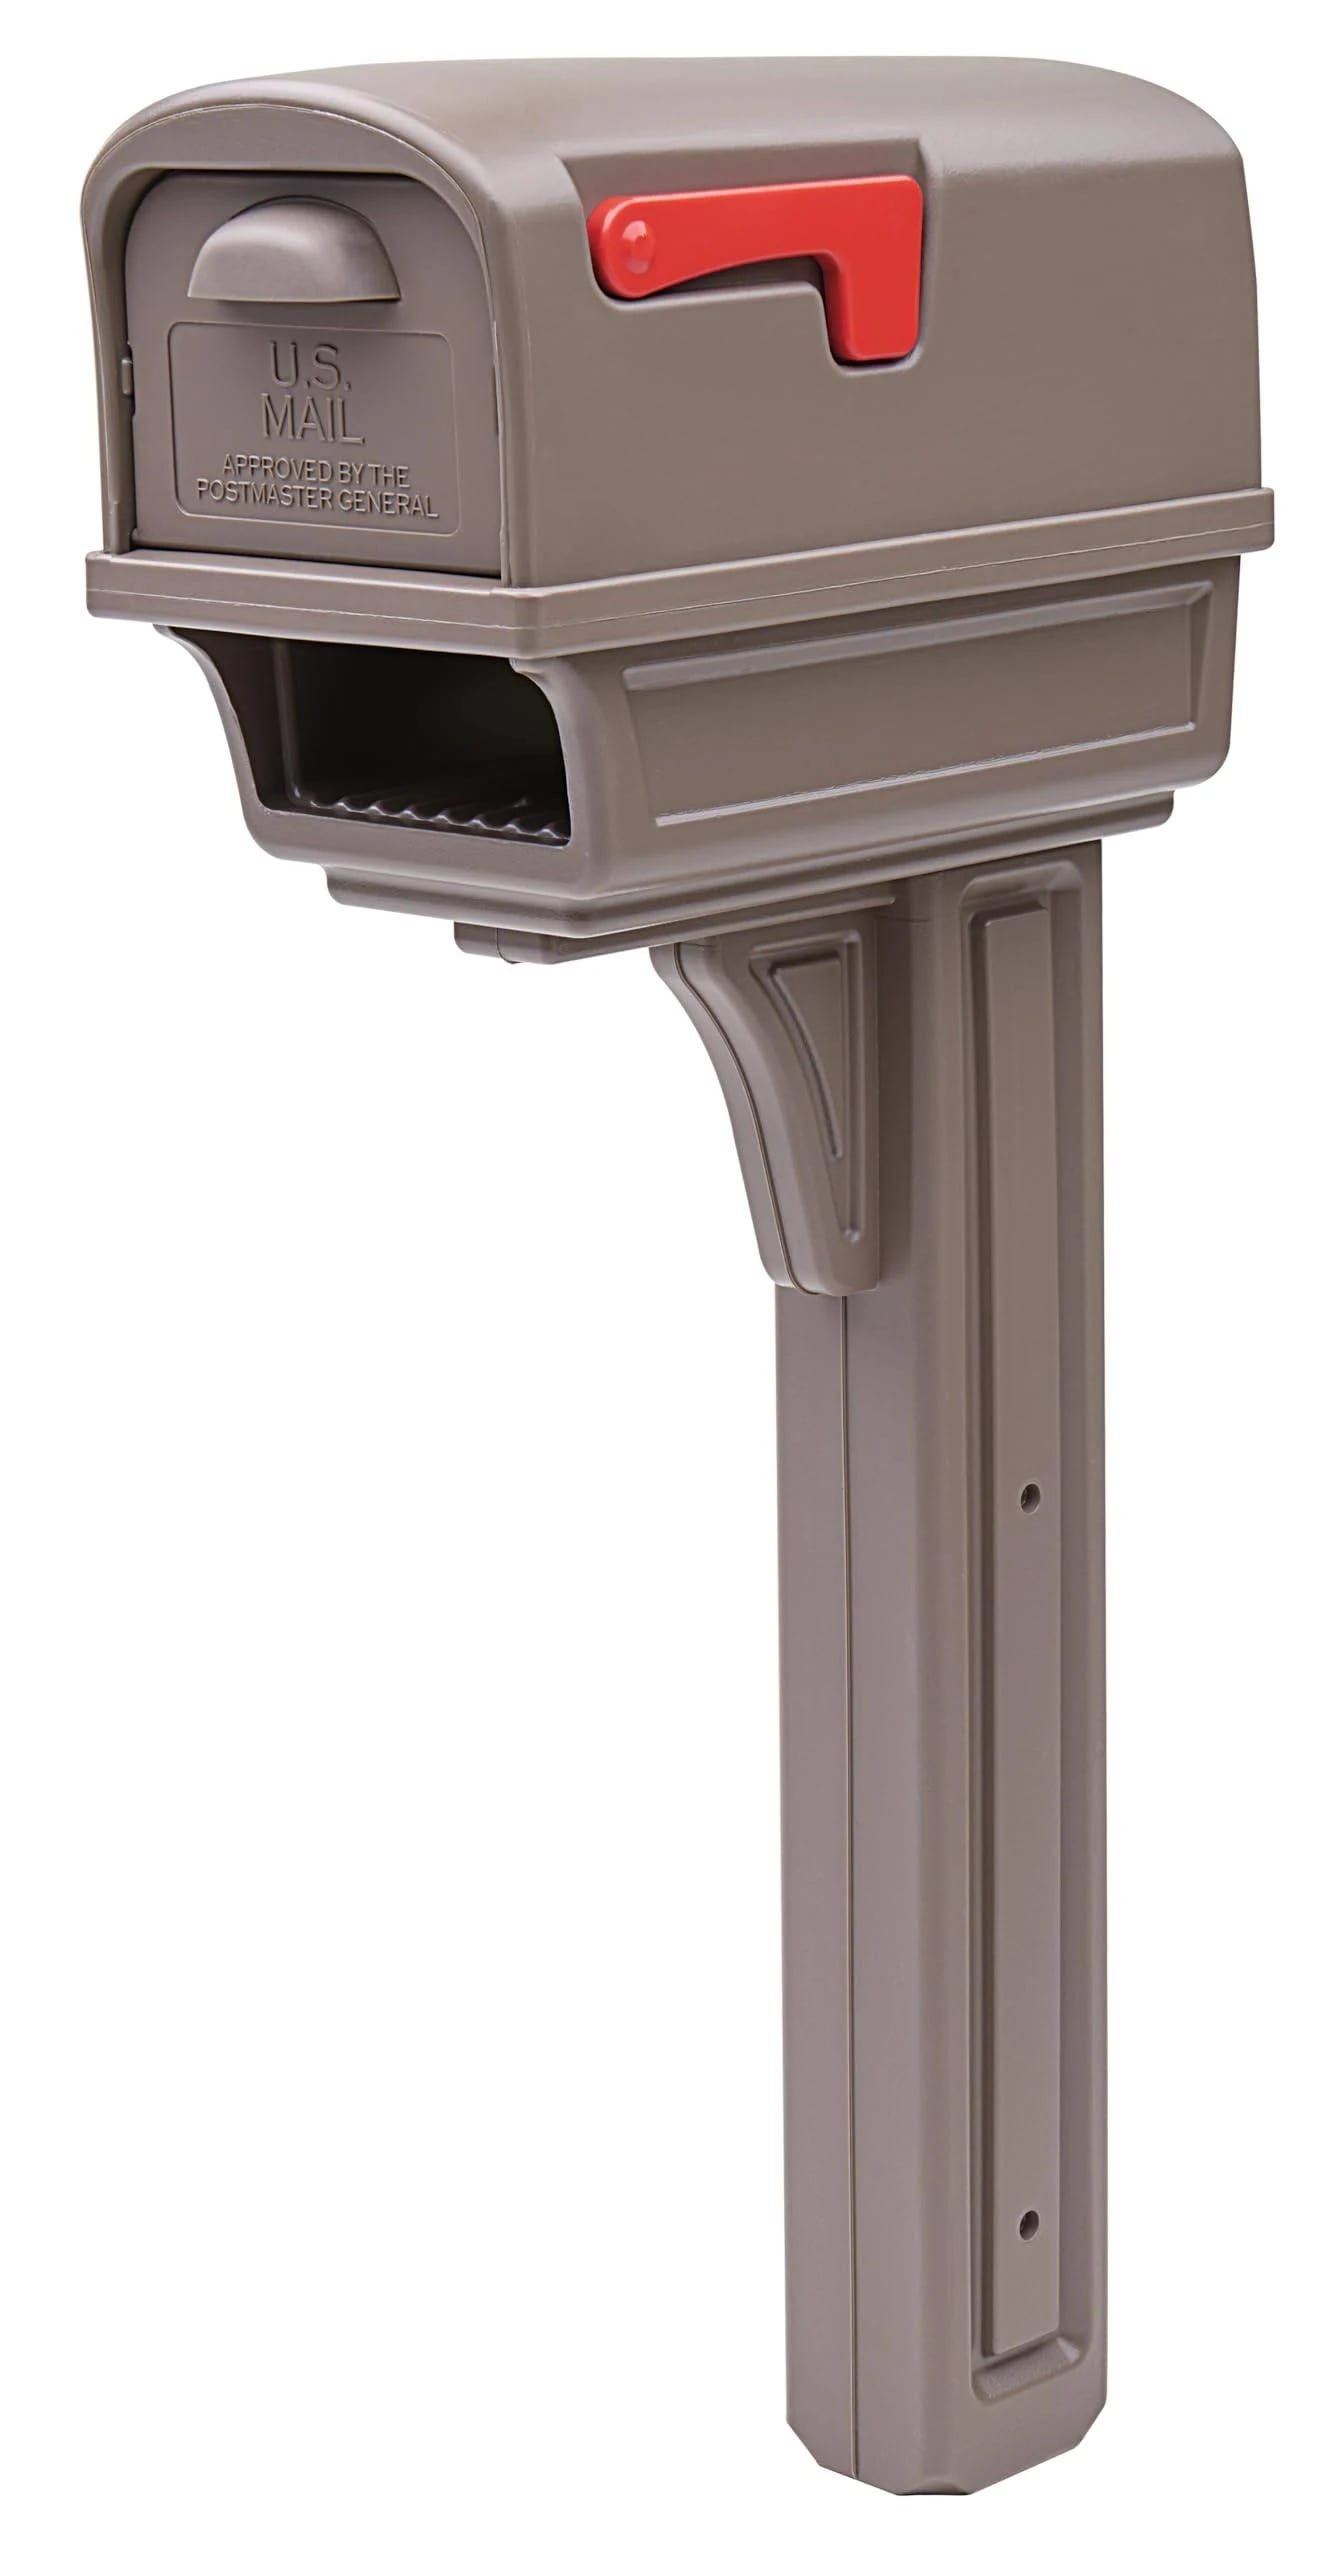 Rust-Proof Gentry Mailbox & Post with Safety Rear Door | Image